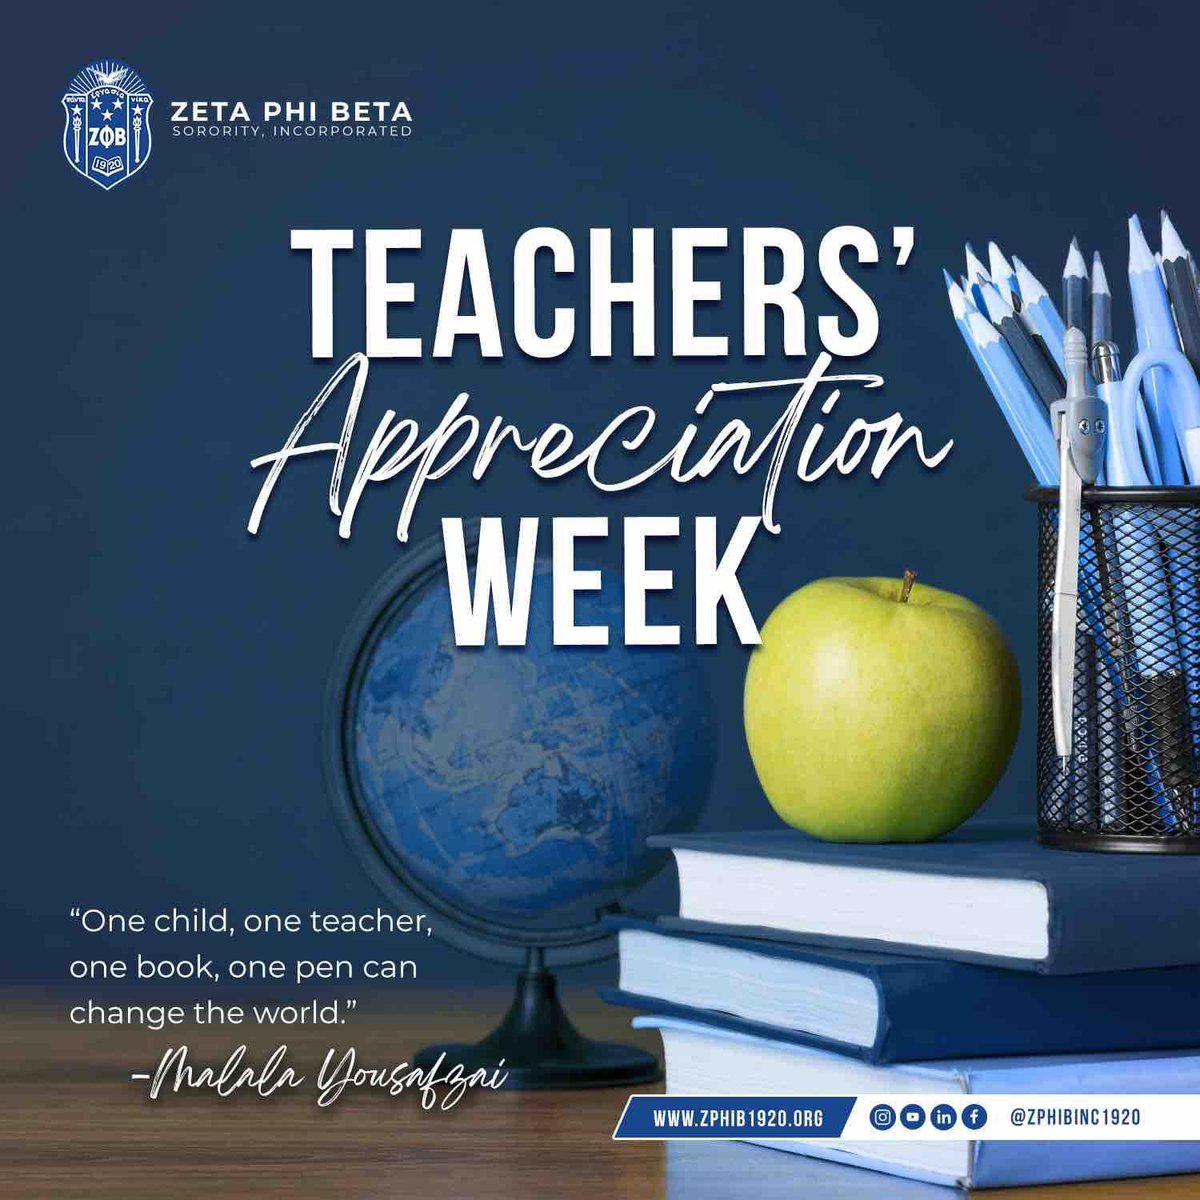 🍎✨ Happy Teacher’s Appreciation Week! ✨📚

We would like to take this moment to recognize educators who inspire, motivate, and shape the minds of our future leaders every day. Thank you for all you do to make a difference in the lives of students around the world! 💙📚🍎